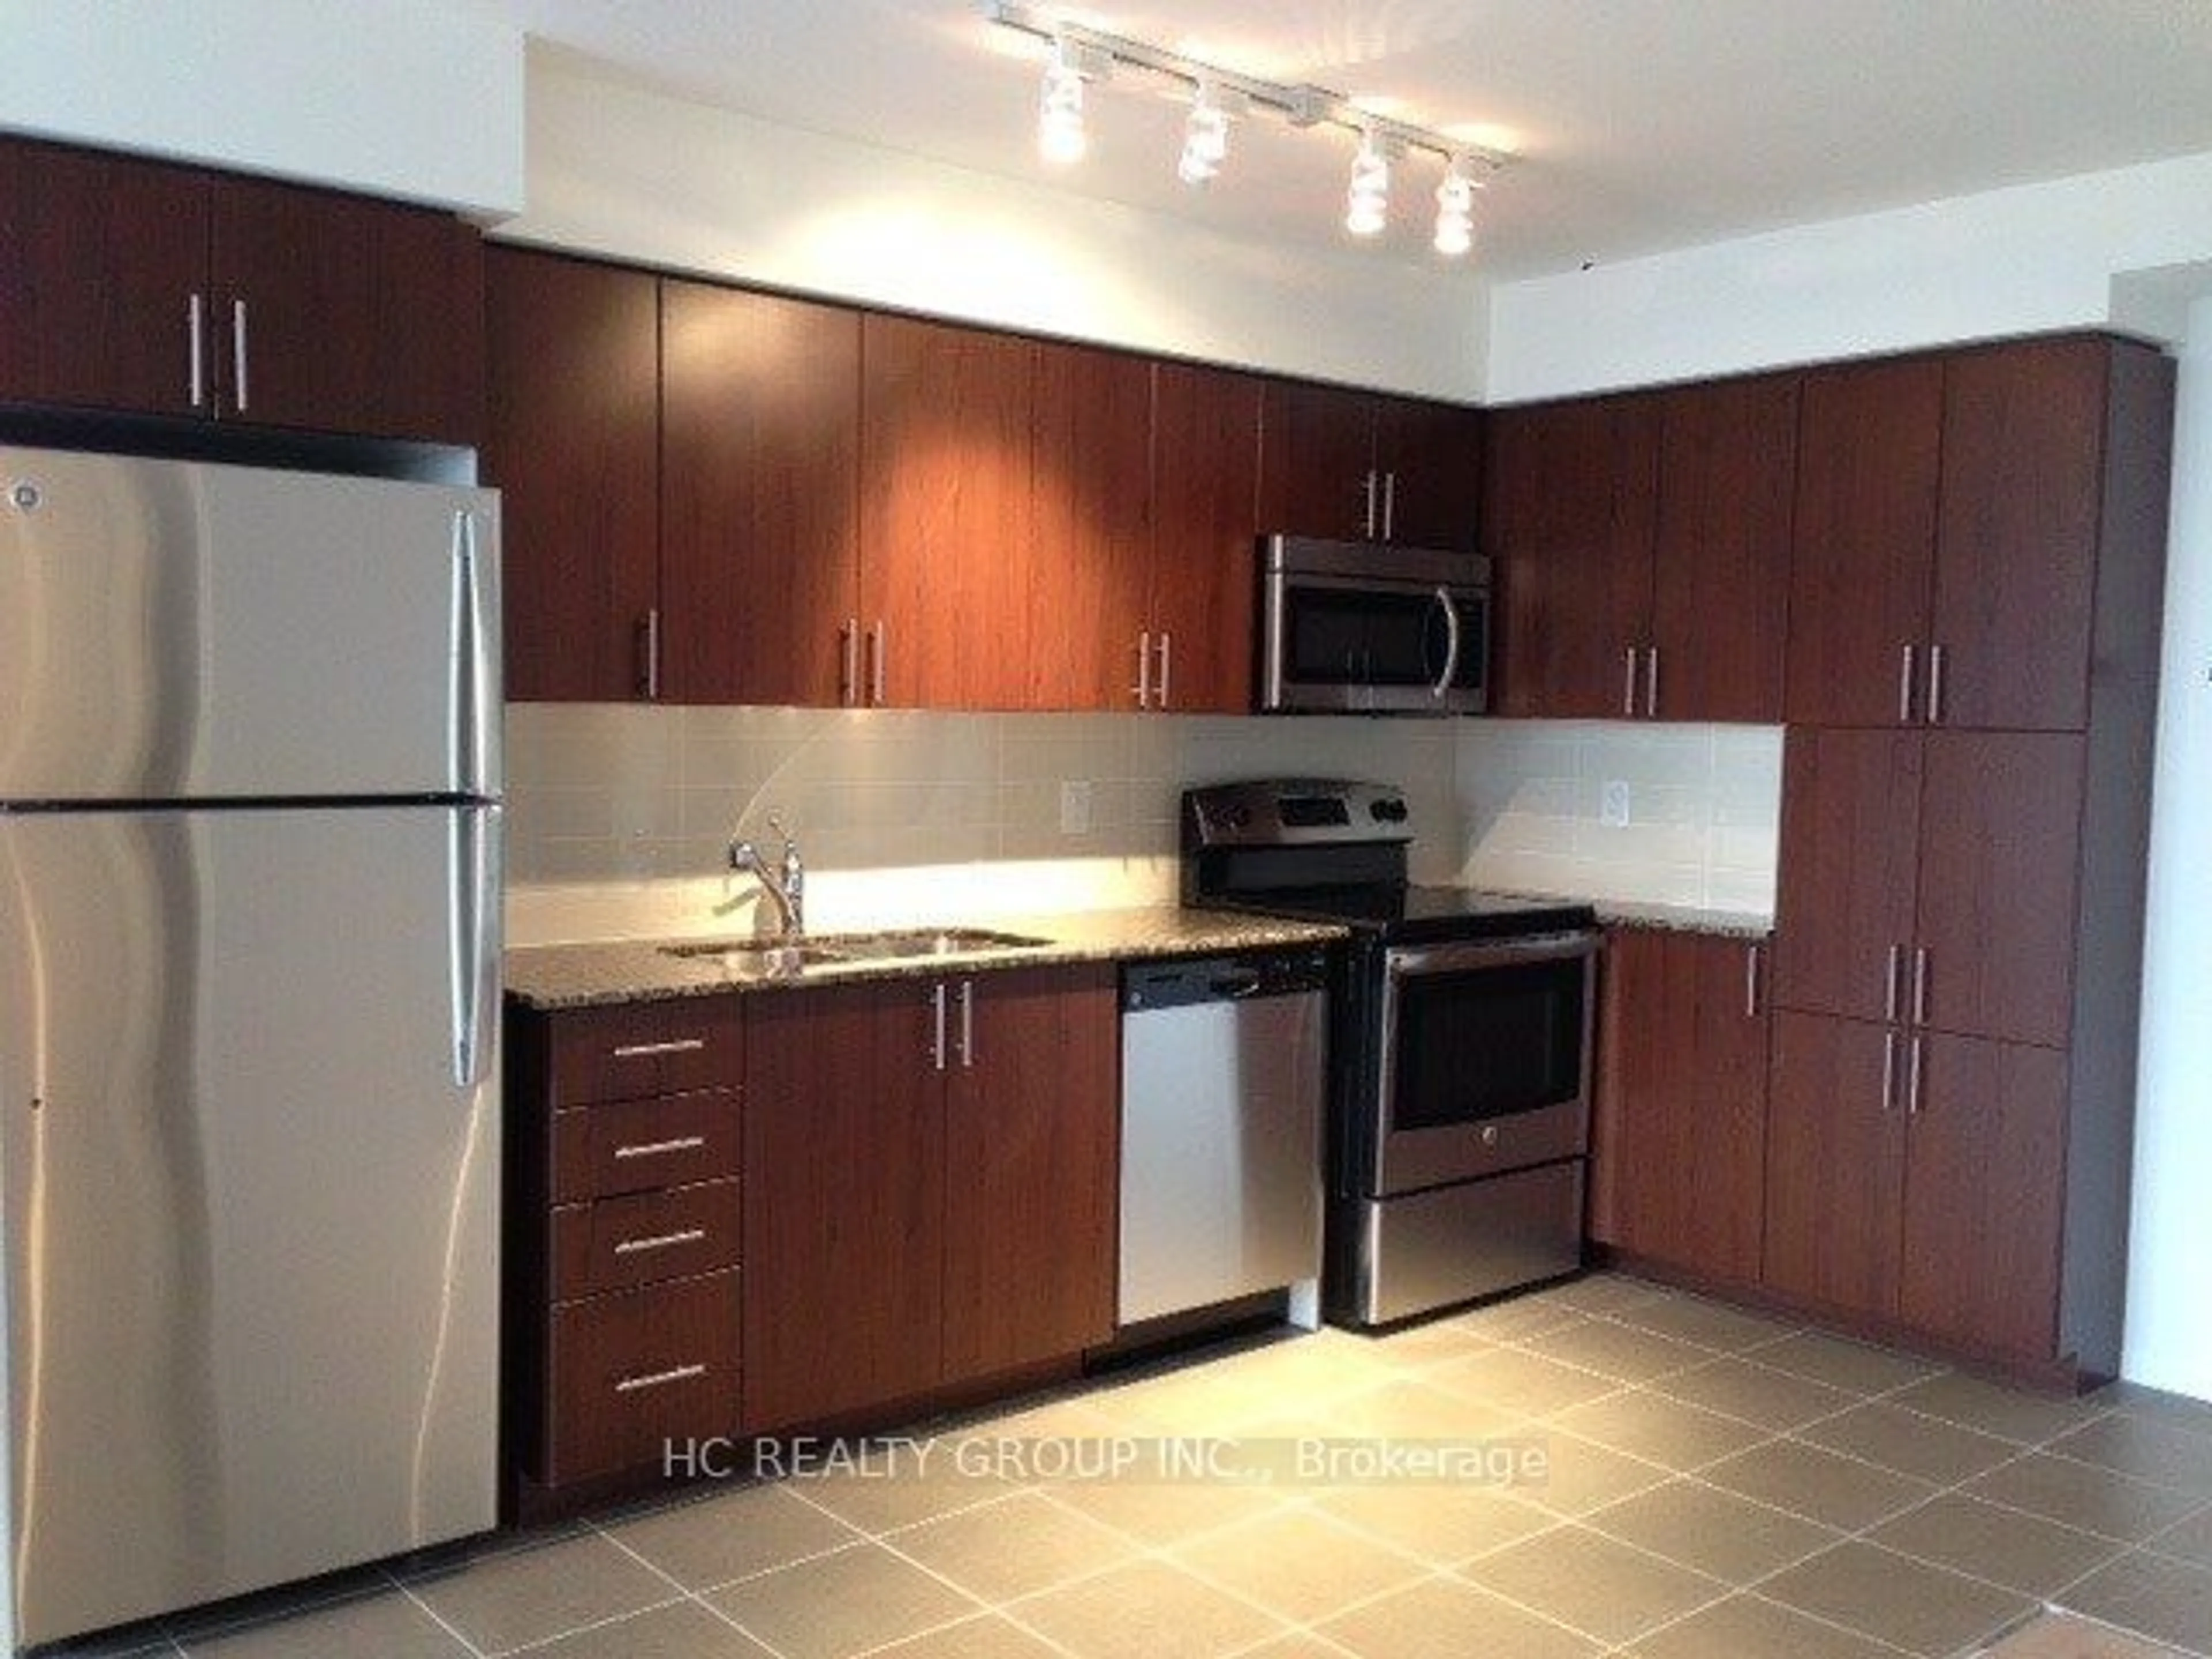 Standard kitchen for 830 Lawrence Ave #2309, Toronto Ontario M6A 0B6